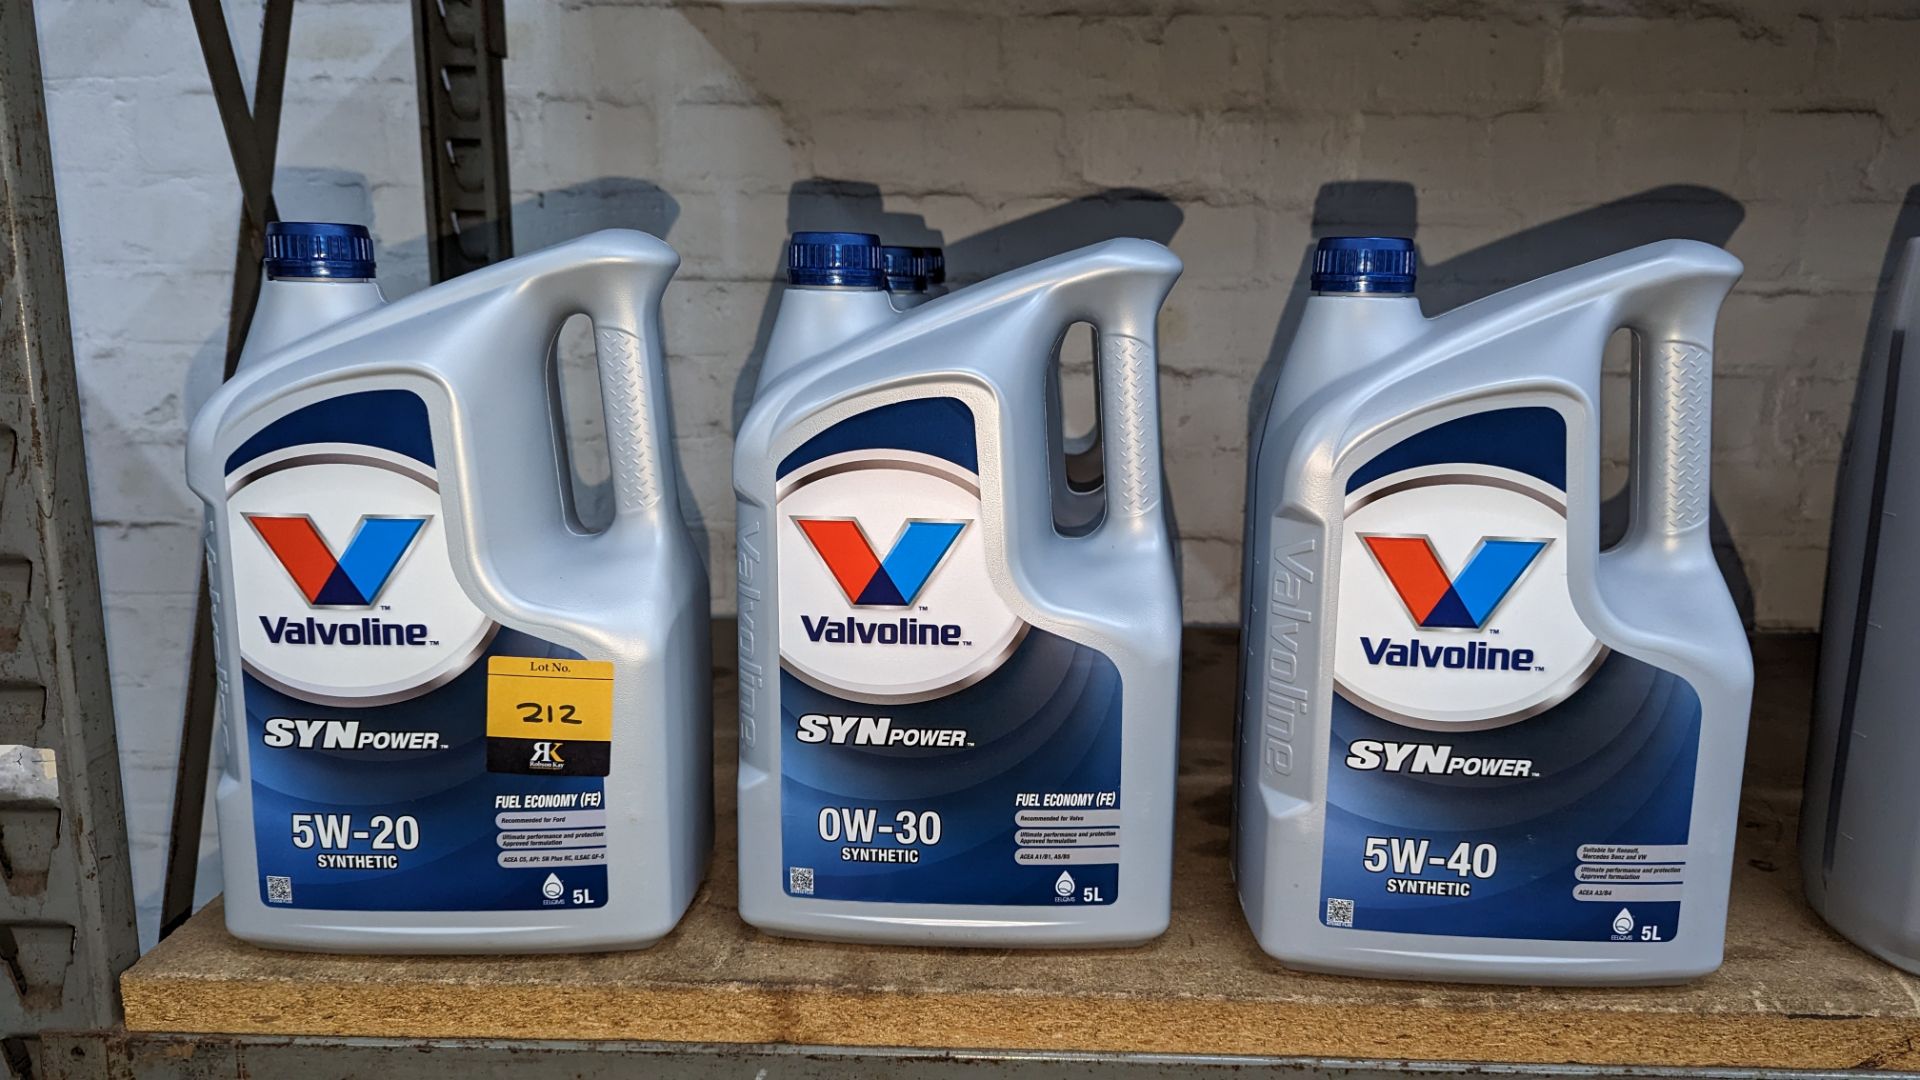 5 off assorted 5 litre bottles of Valvoline synthetic oil